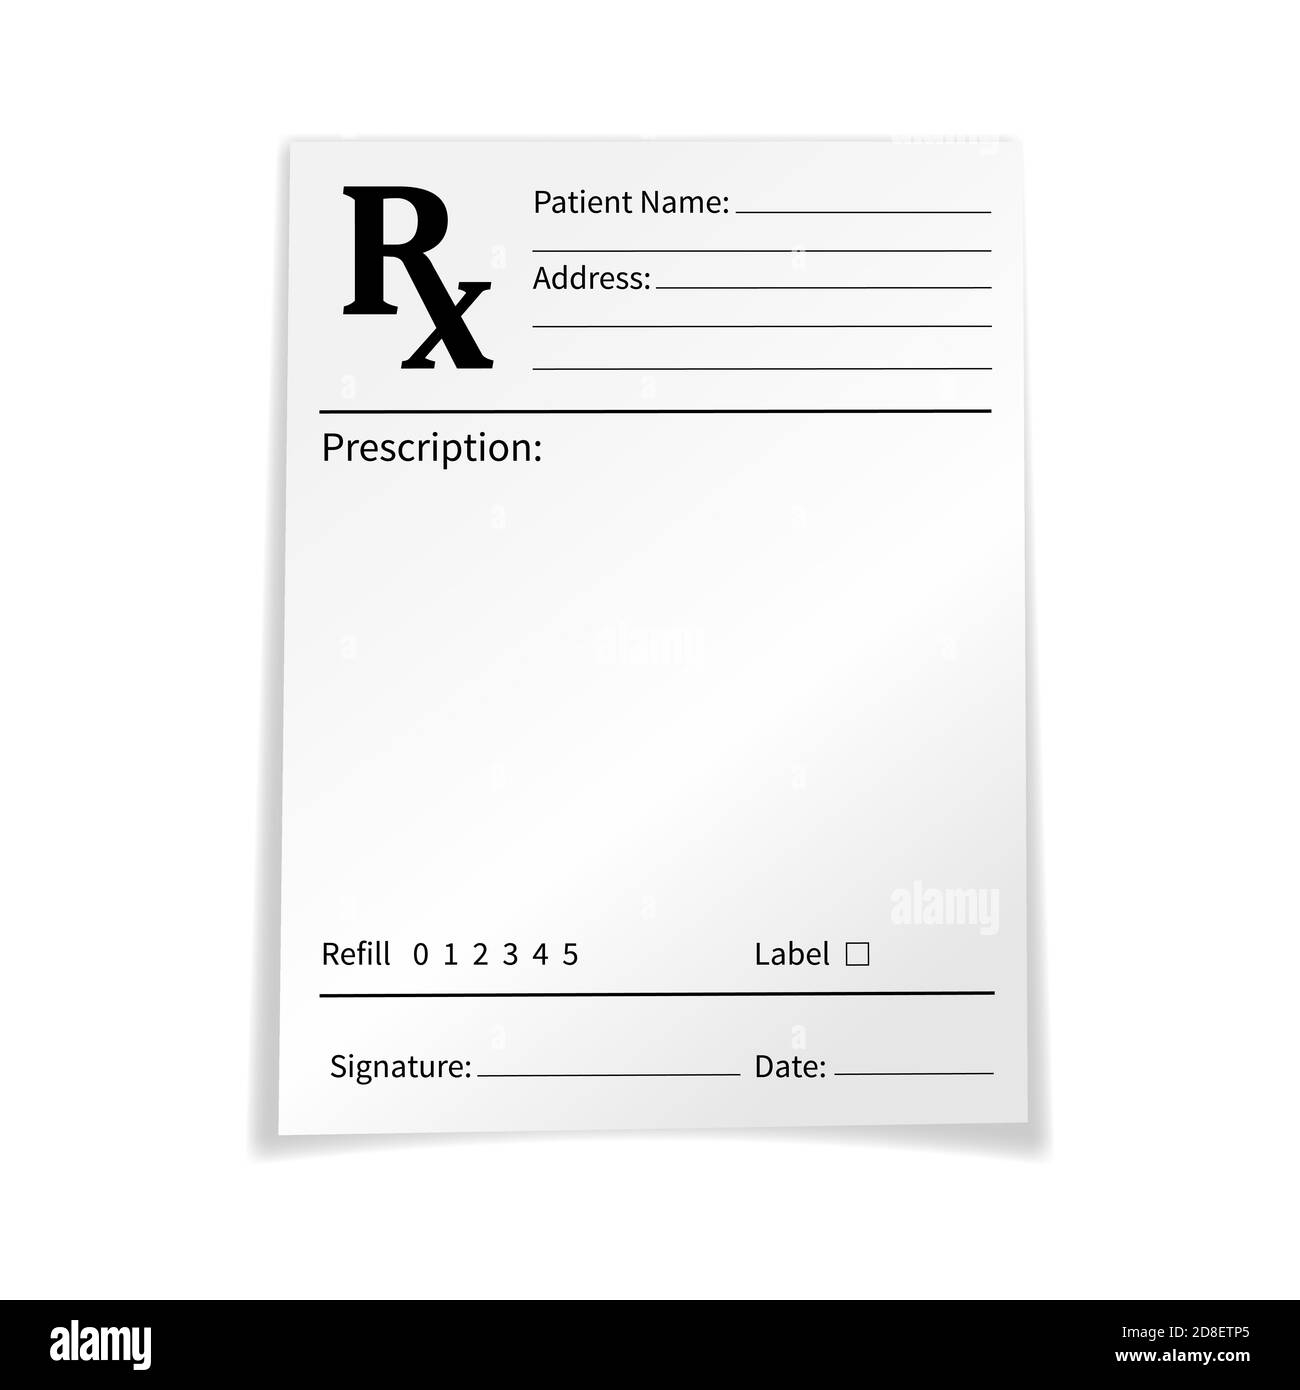 Blank Medical Prescription Form Isolated On White Background  With Blank Prescription Form Template